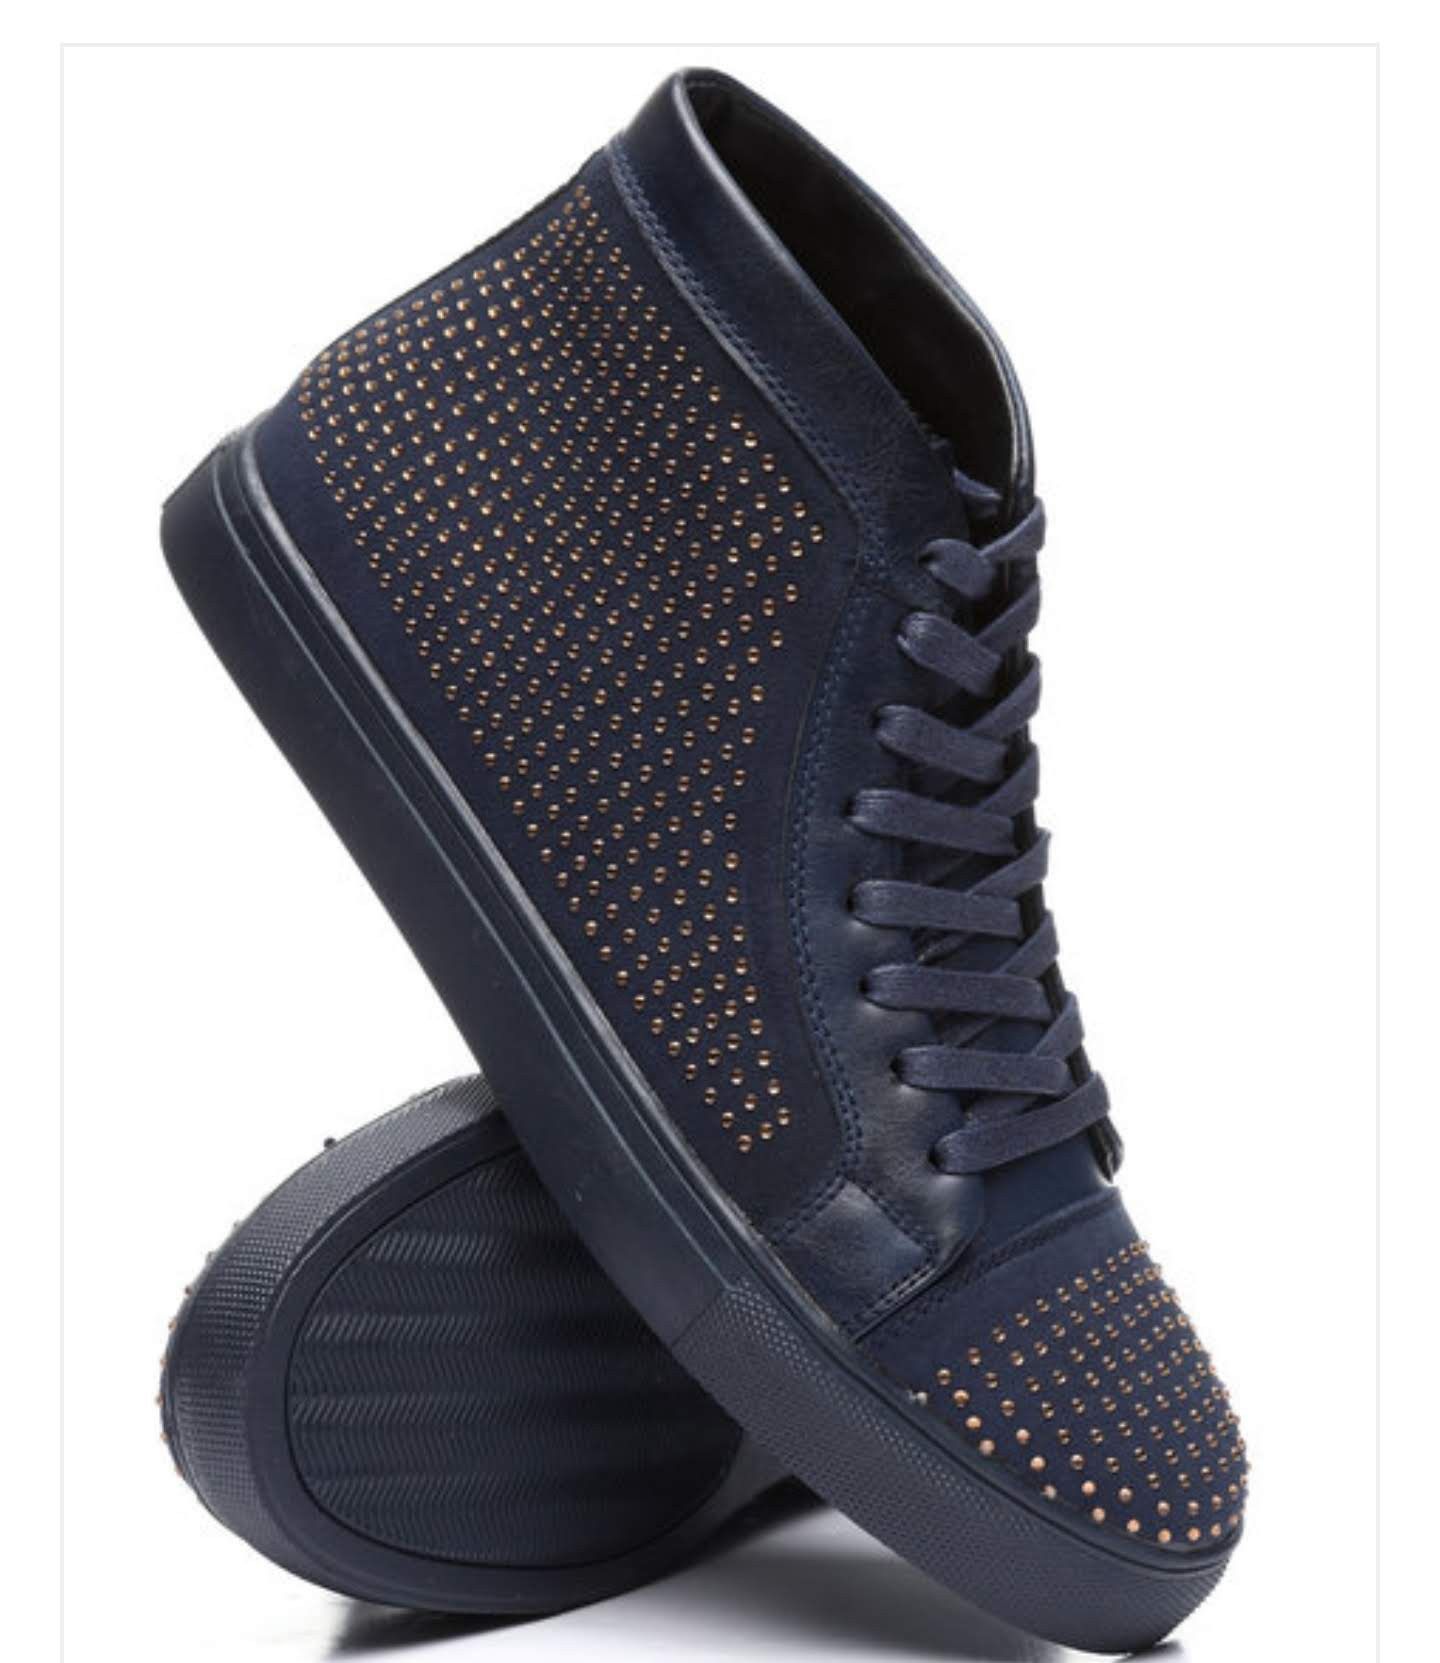 The High Top Studded Sneakers